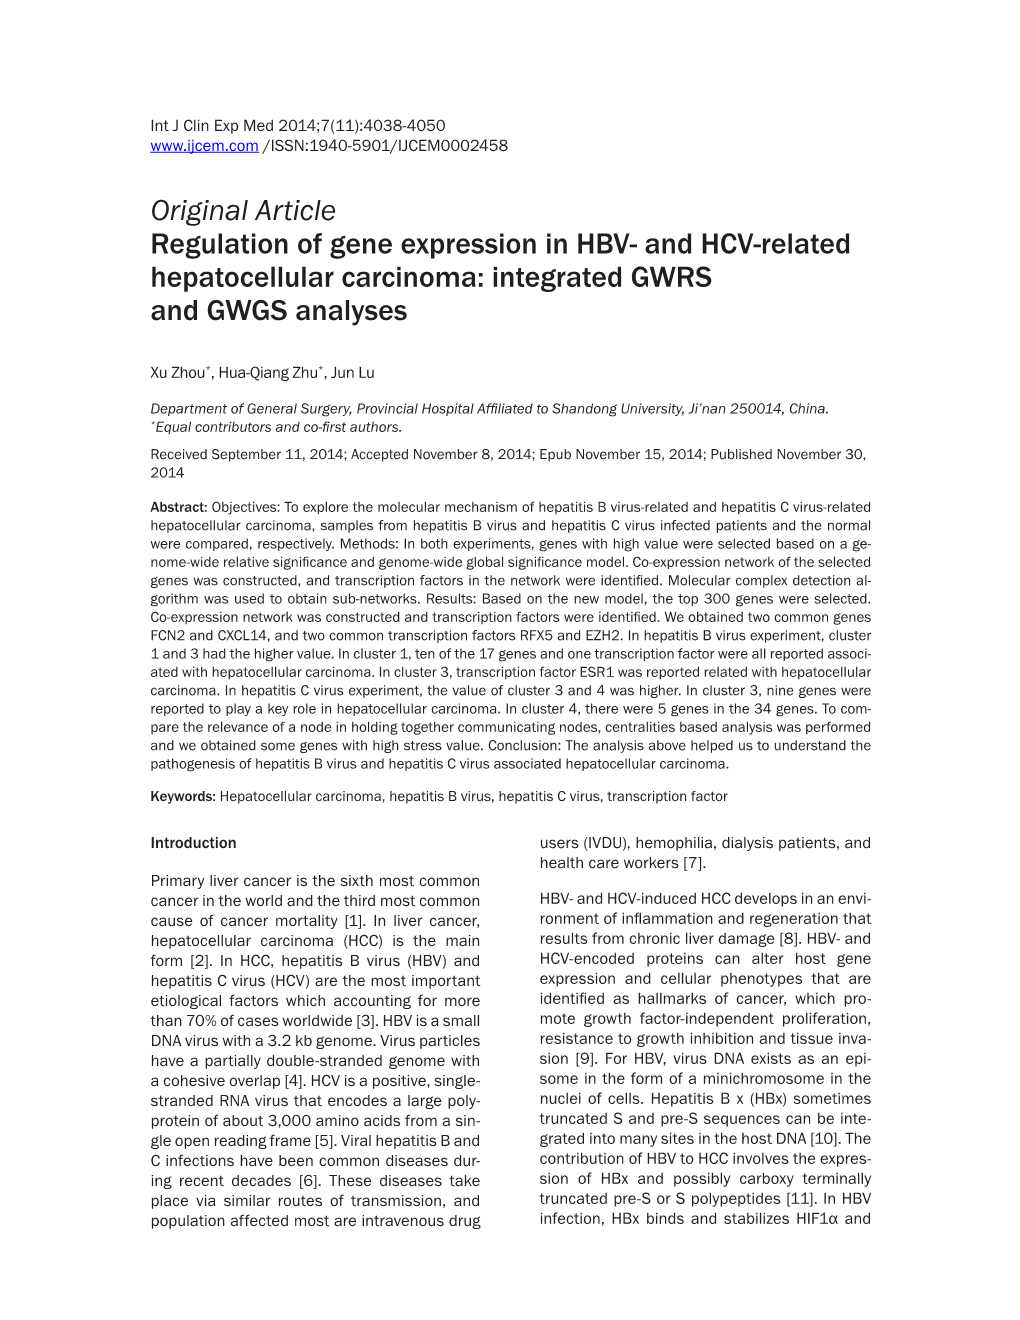 Original Article Regulation of Gene Expression in HBV- and HCV-Related Hepatocellular Carcinoma: Integrated GWRS and GWGS Analyses